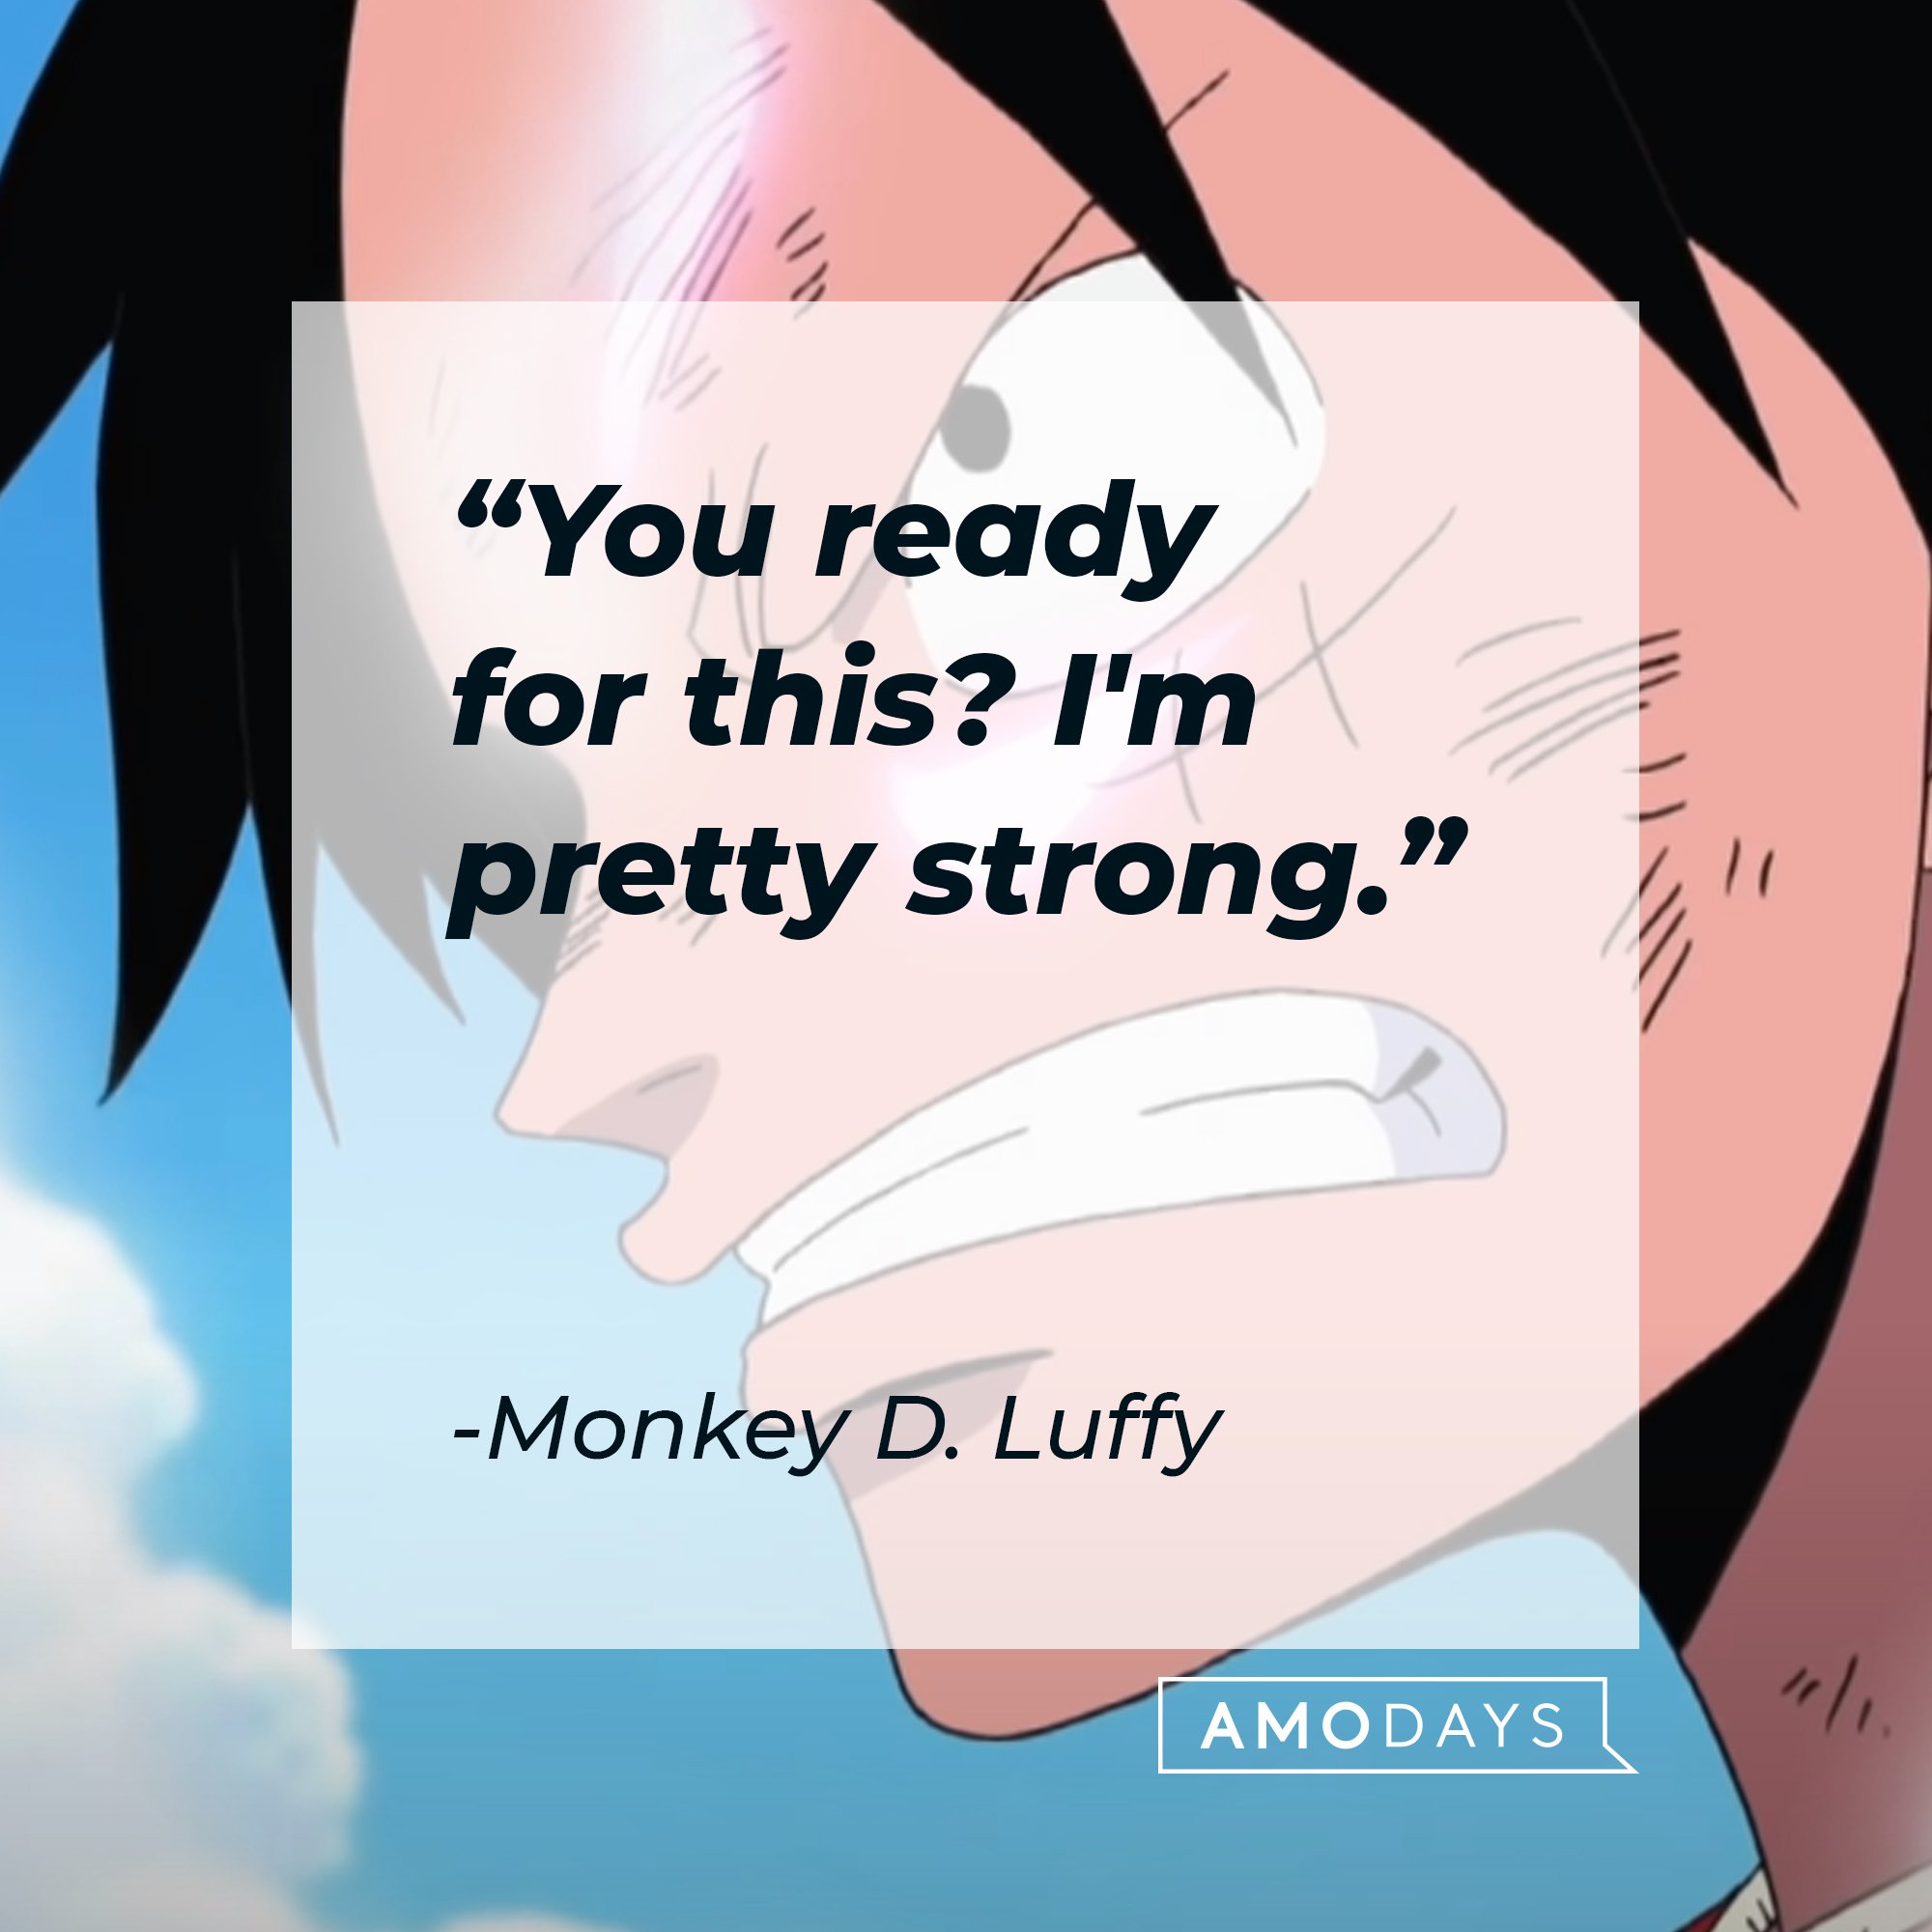 Monkey D. Luffy's quote: "You ready for this? I'm pretty strong." |  Image: AmoDays